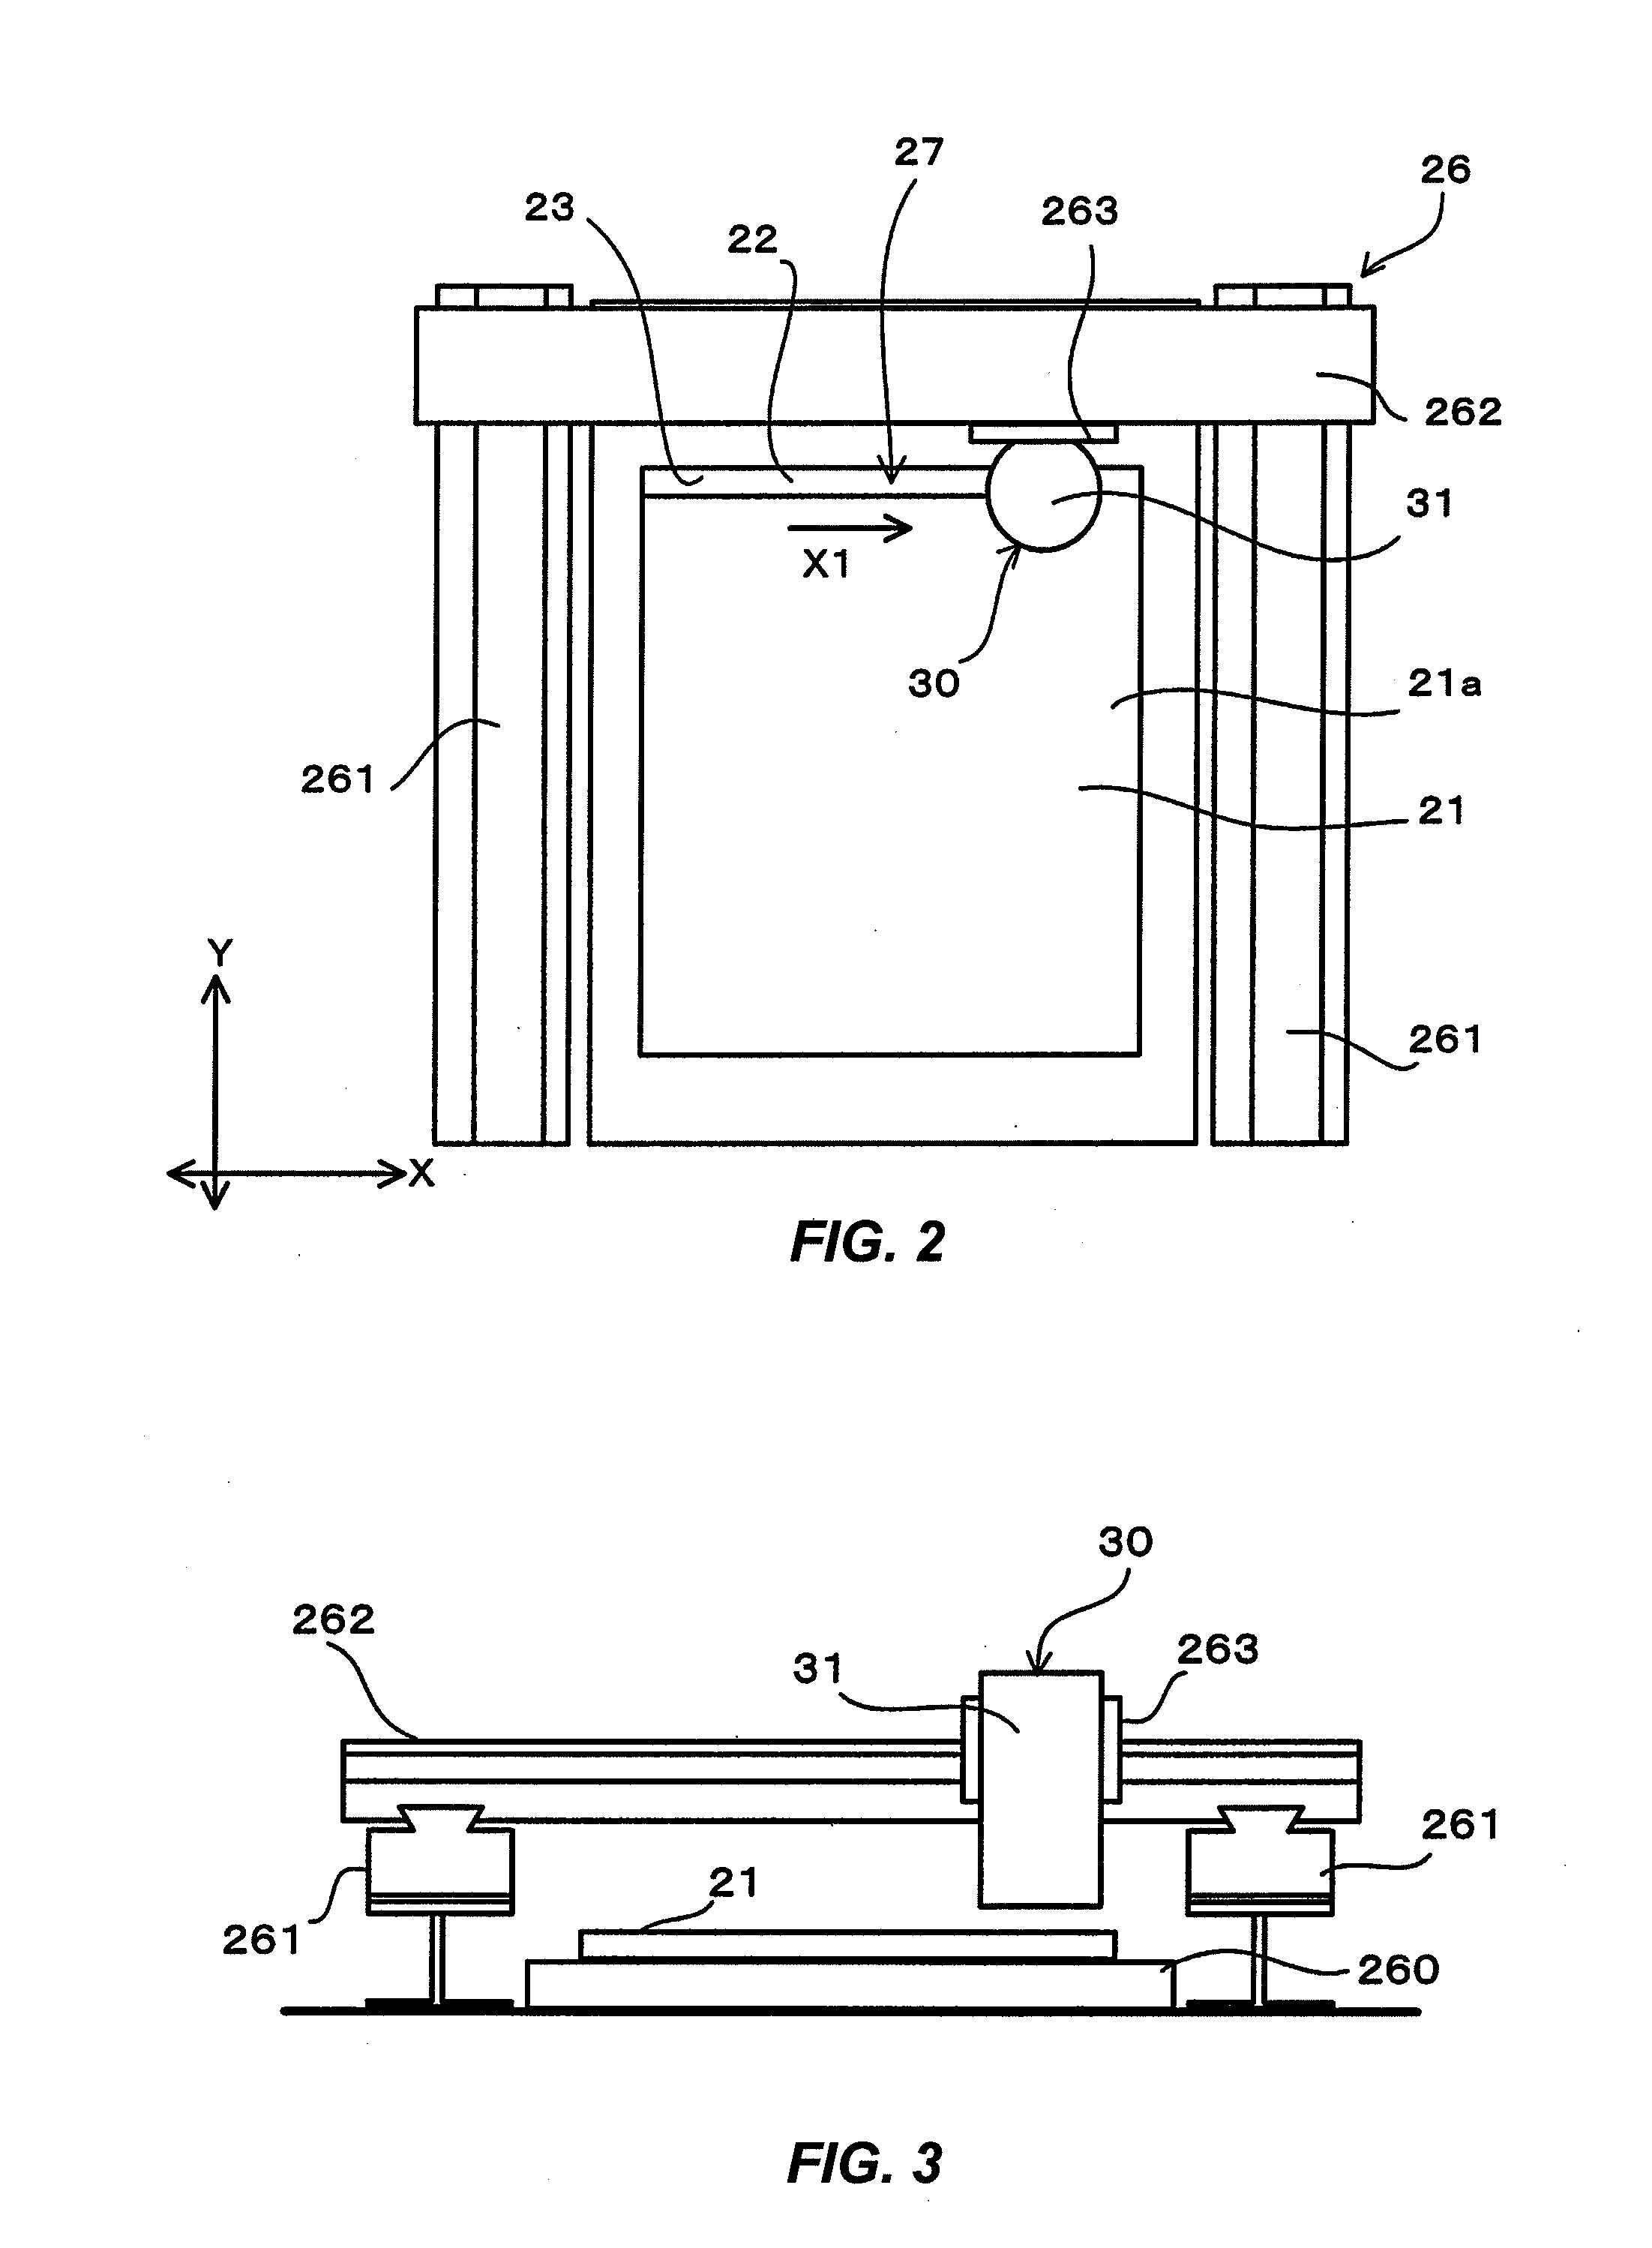 Method of and apparatus for molding glazing gasket onto multilayer glass panel